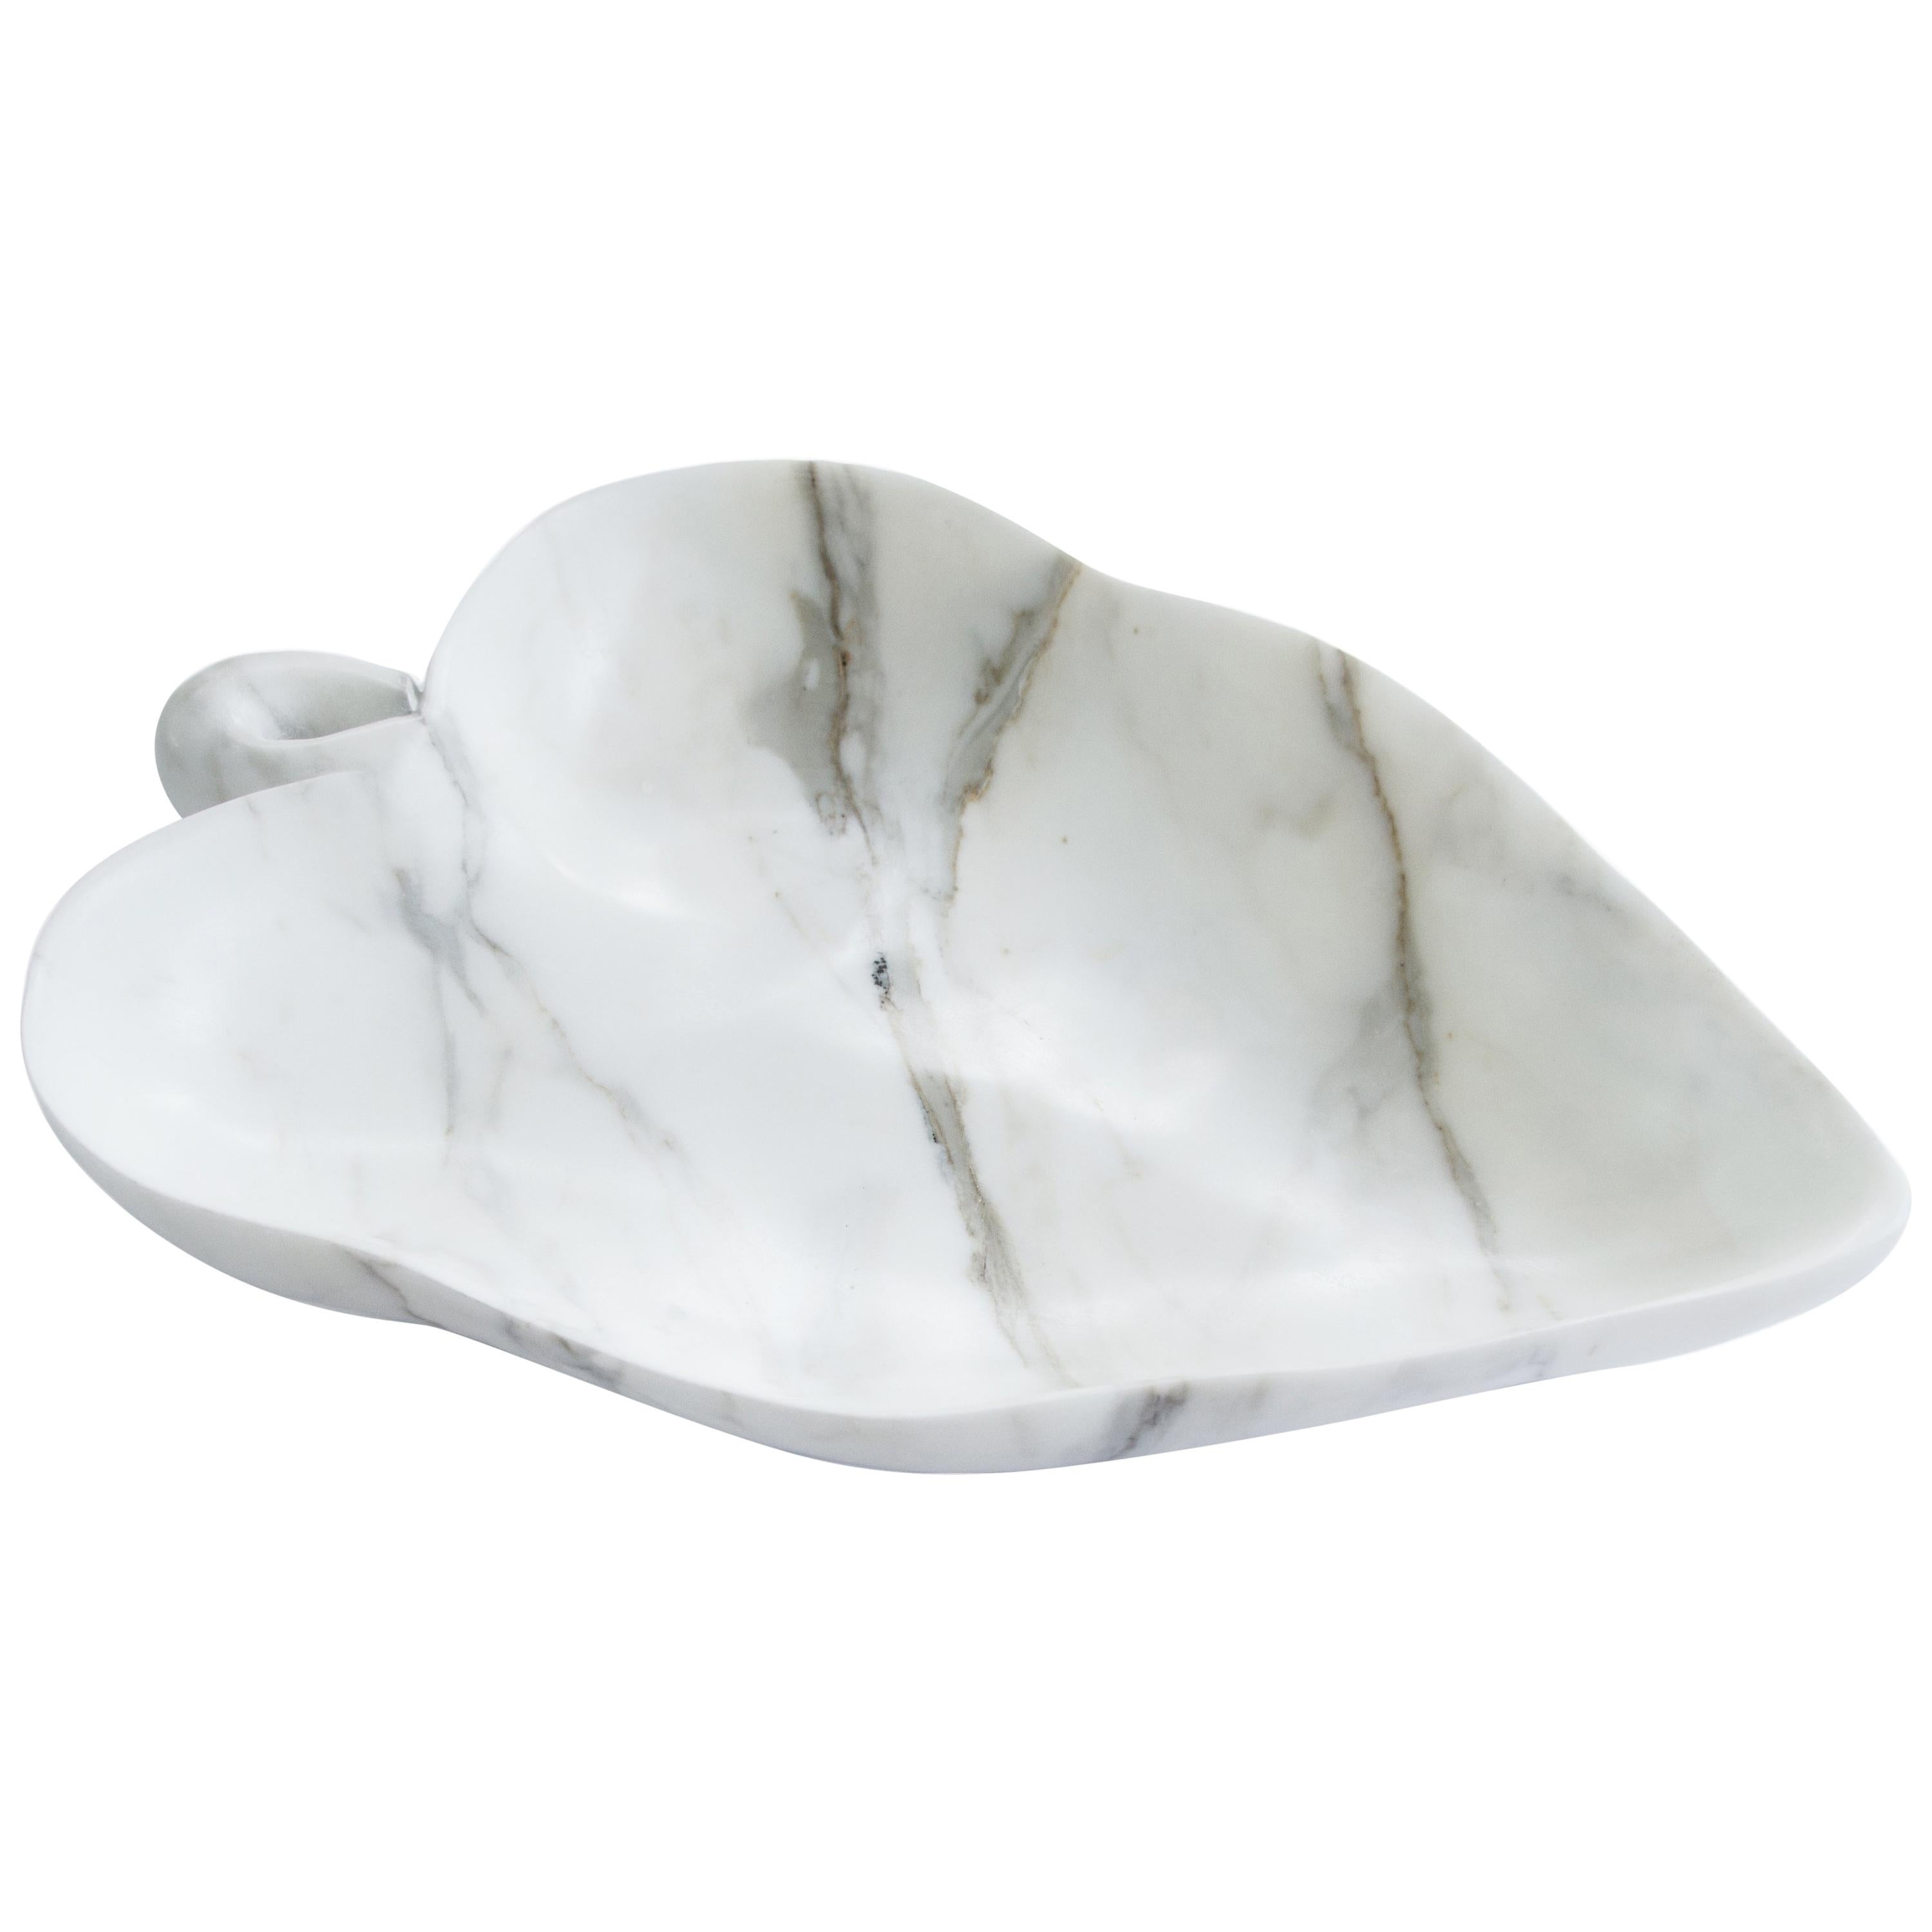 Hand-Crafted Big Leaf Bowl in Calacatta Marble Handmade in Italy